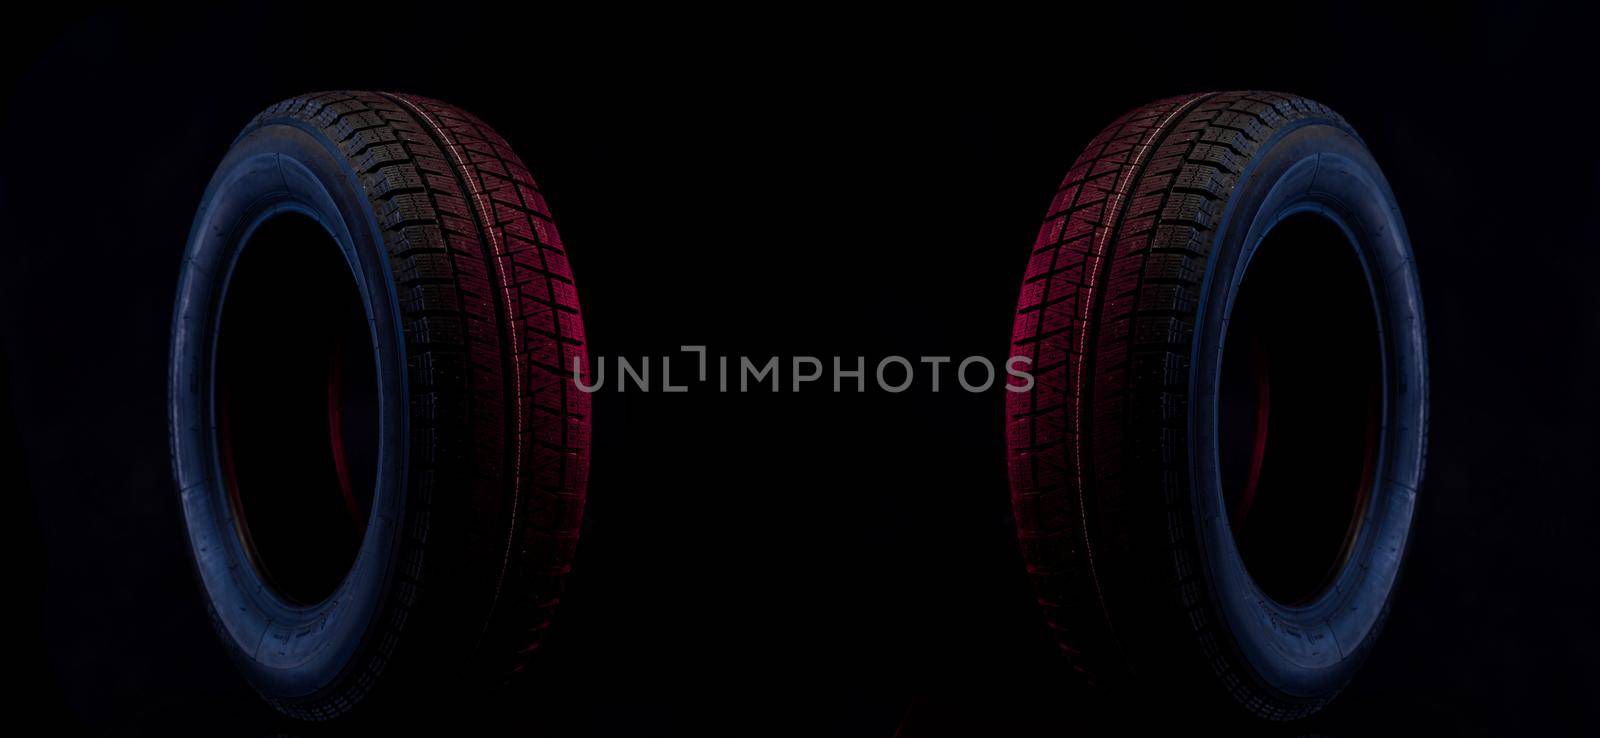 winter wheel for a car on a stylish black and blue red background.